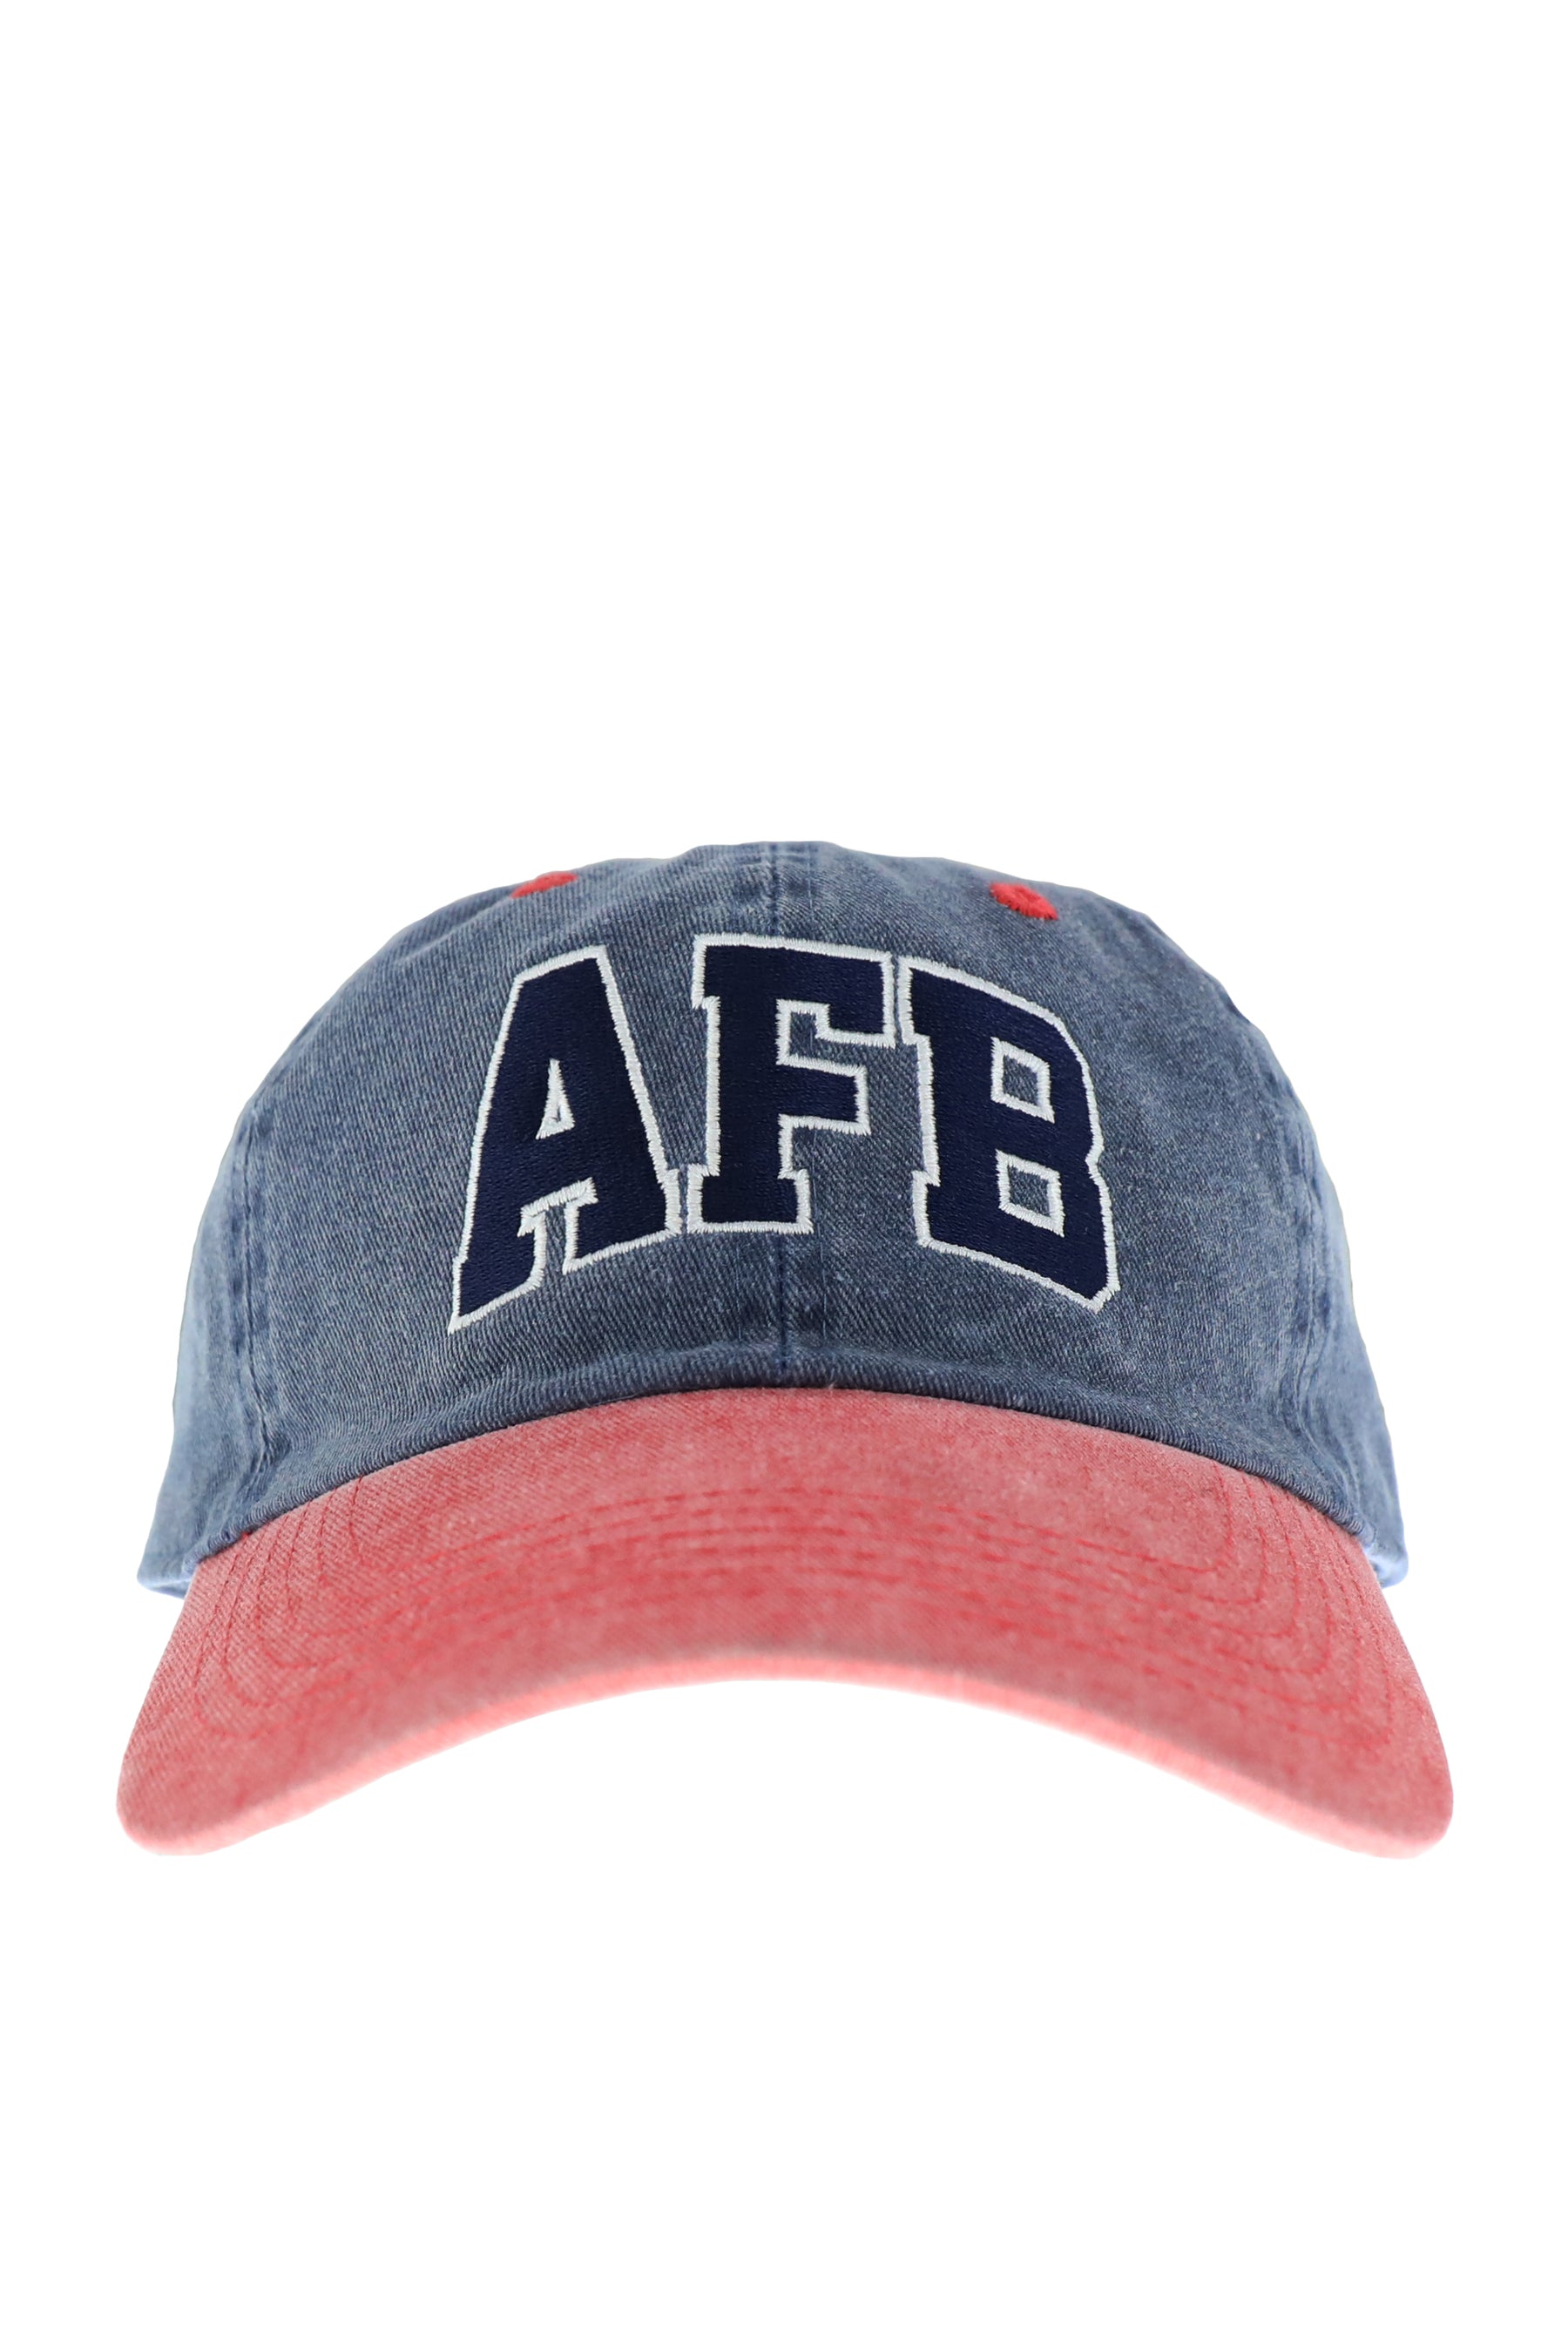 AFB SS23 CLASSIC LOGO CAP / RED NVY -NUBIAN 